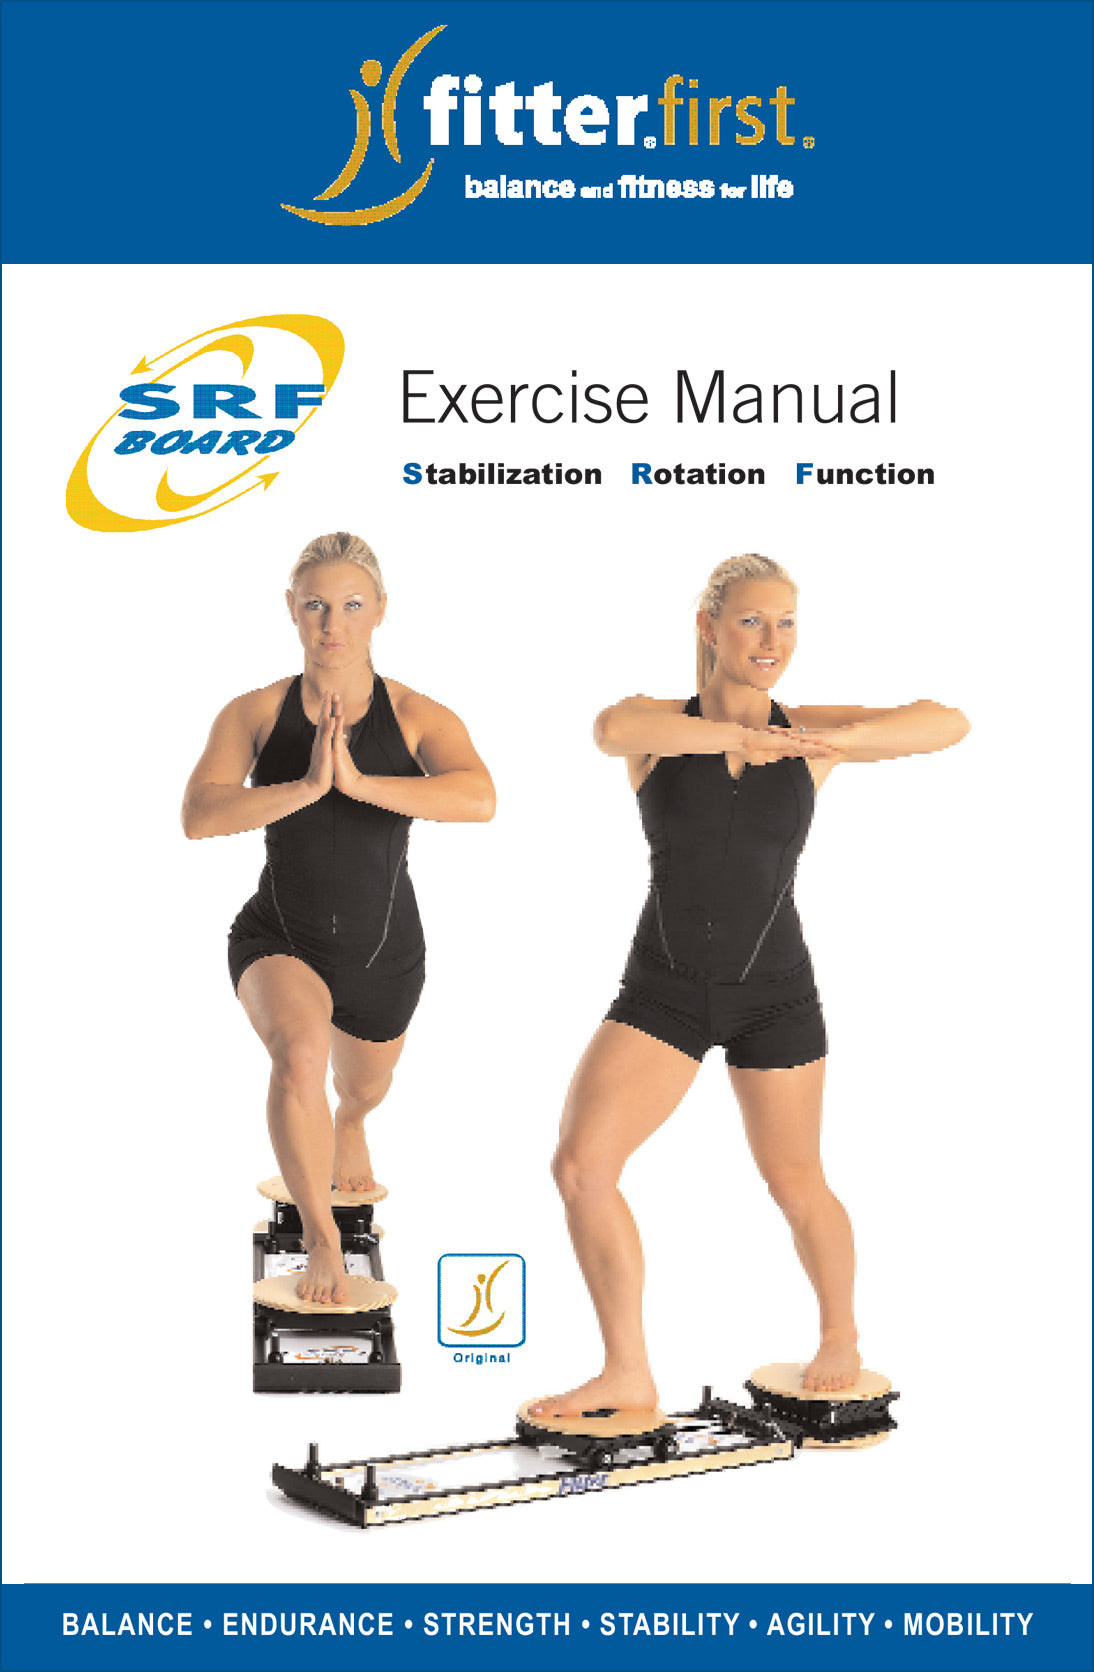 Fitterfirst SRF Board Exercise Manual